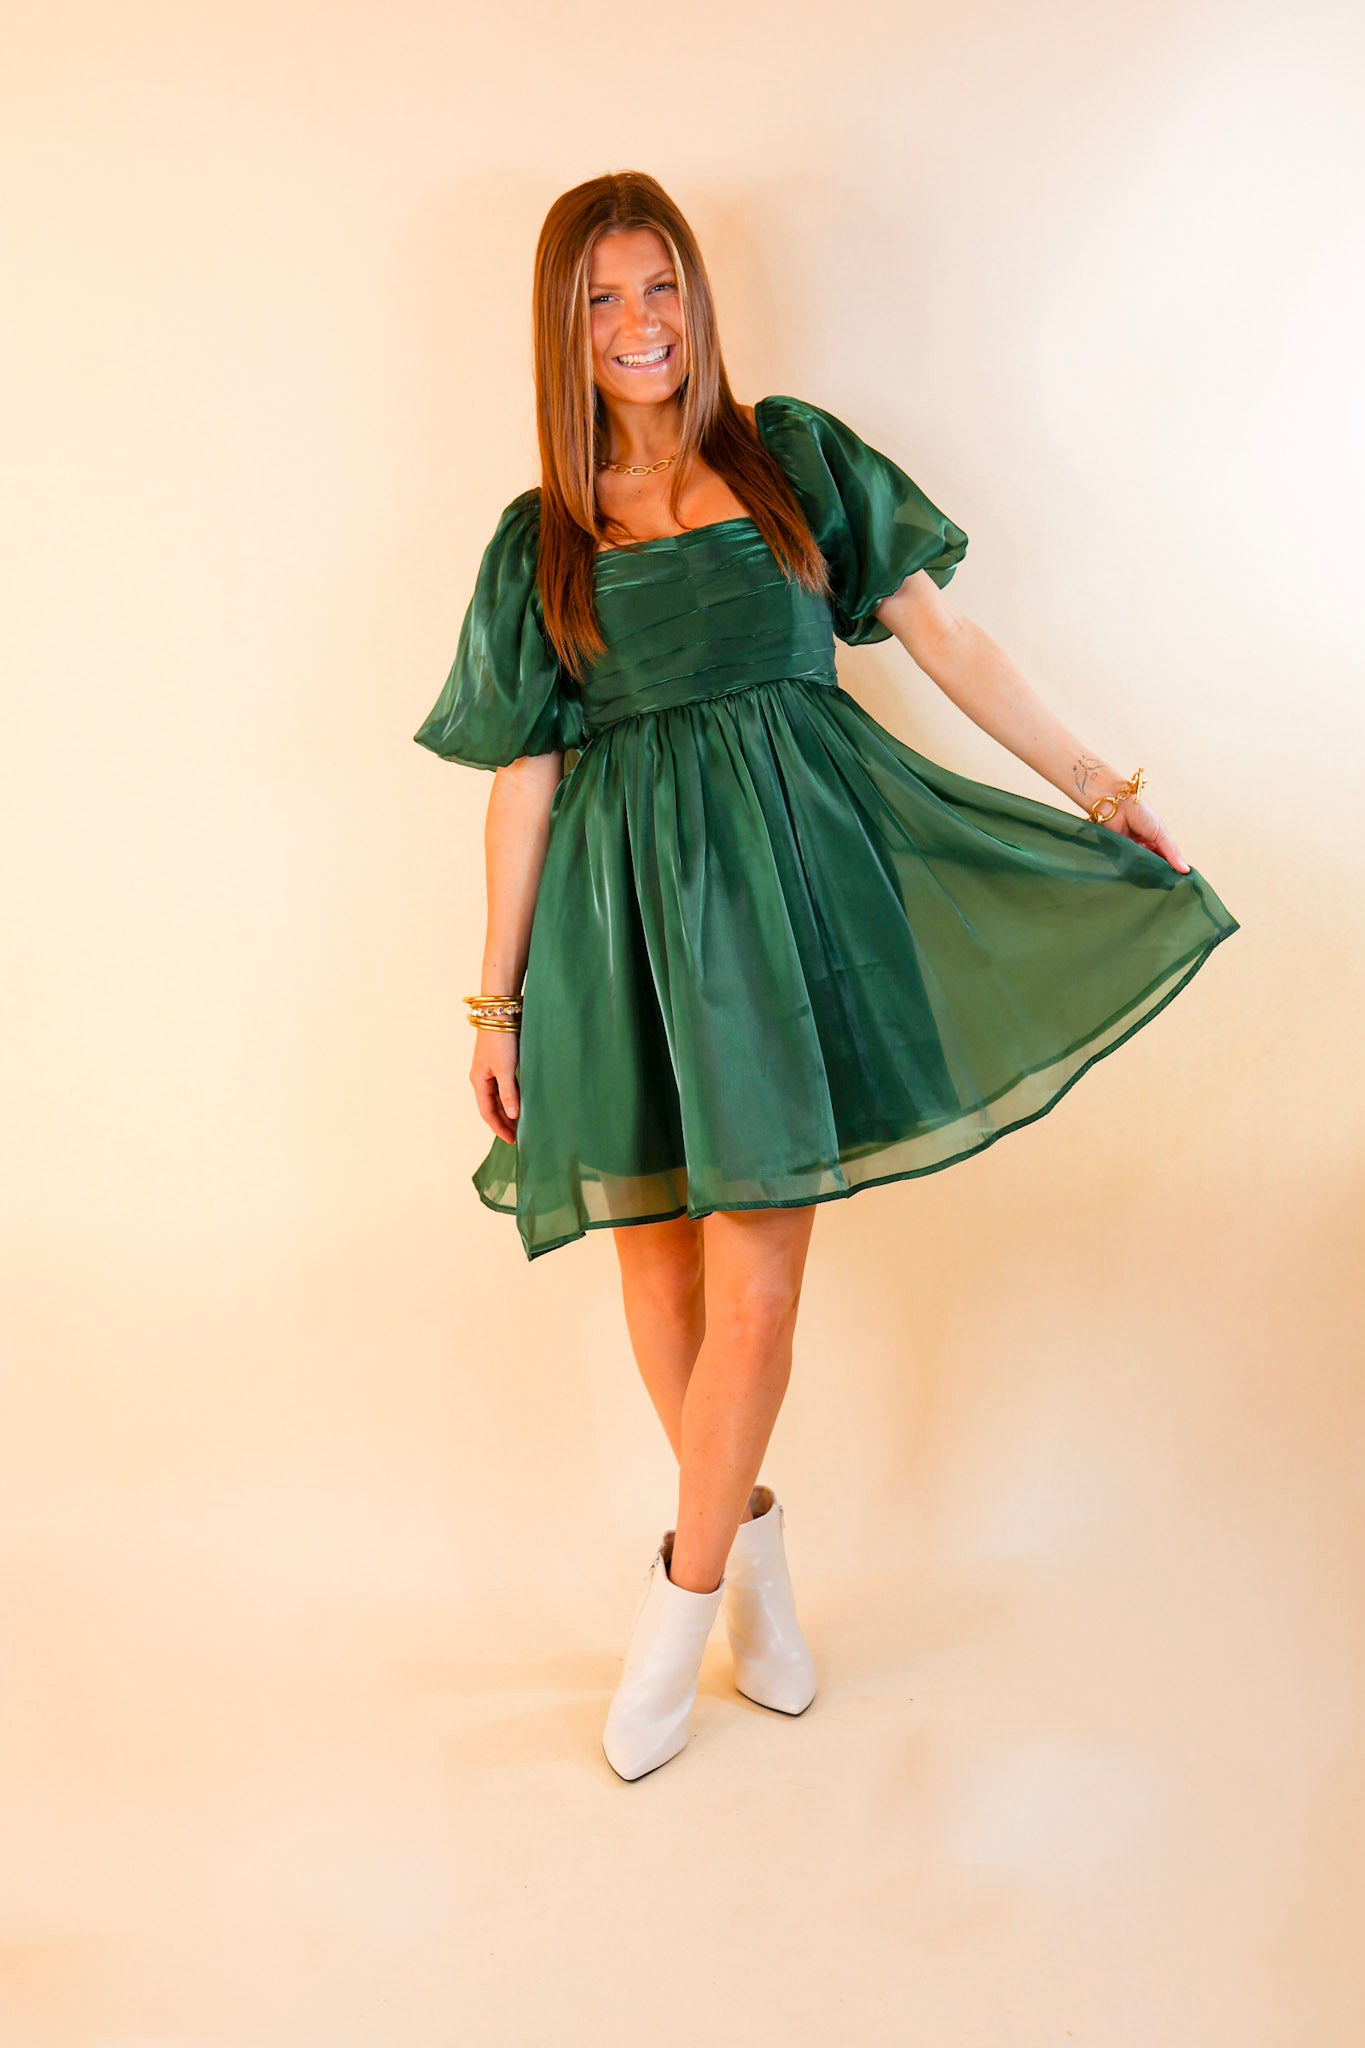 Central Avenue Square Neck Metallic Dress with Short Balloon Sleeves in Emerald Green - Giddy Up Glamour Boutique